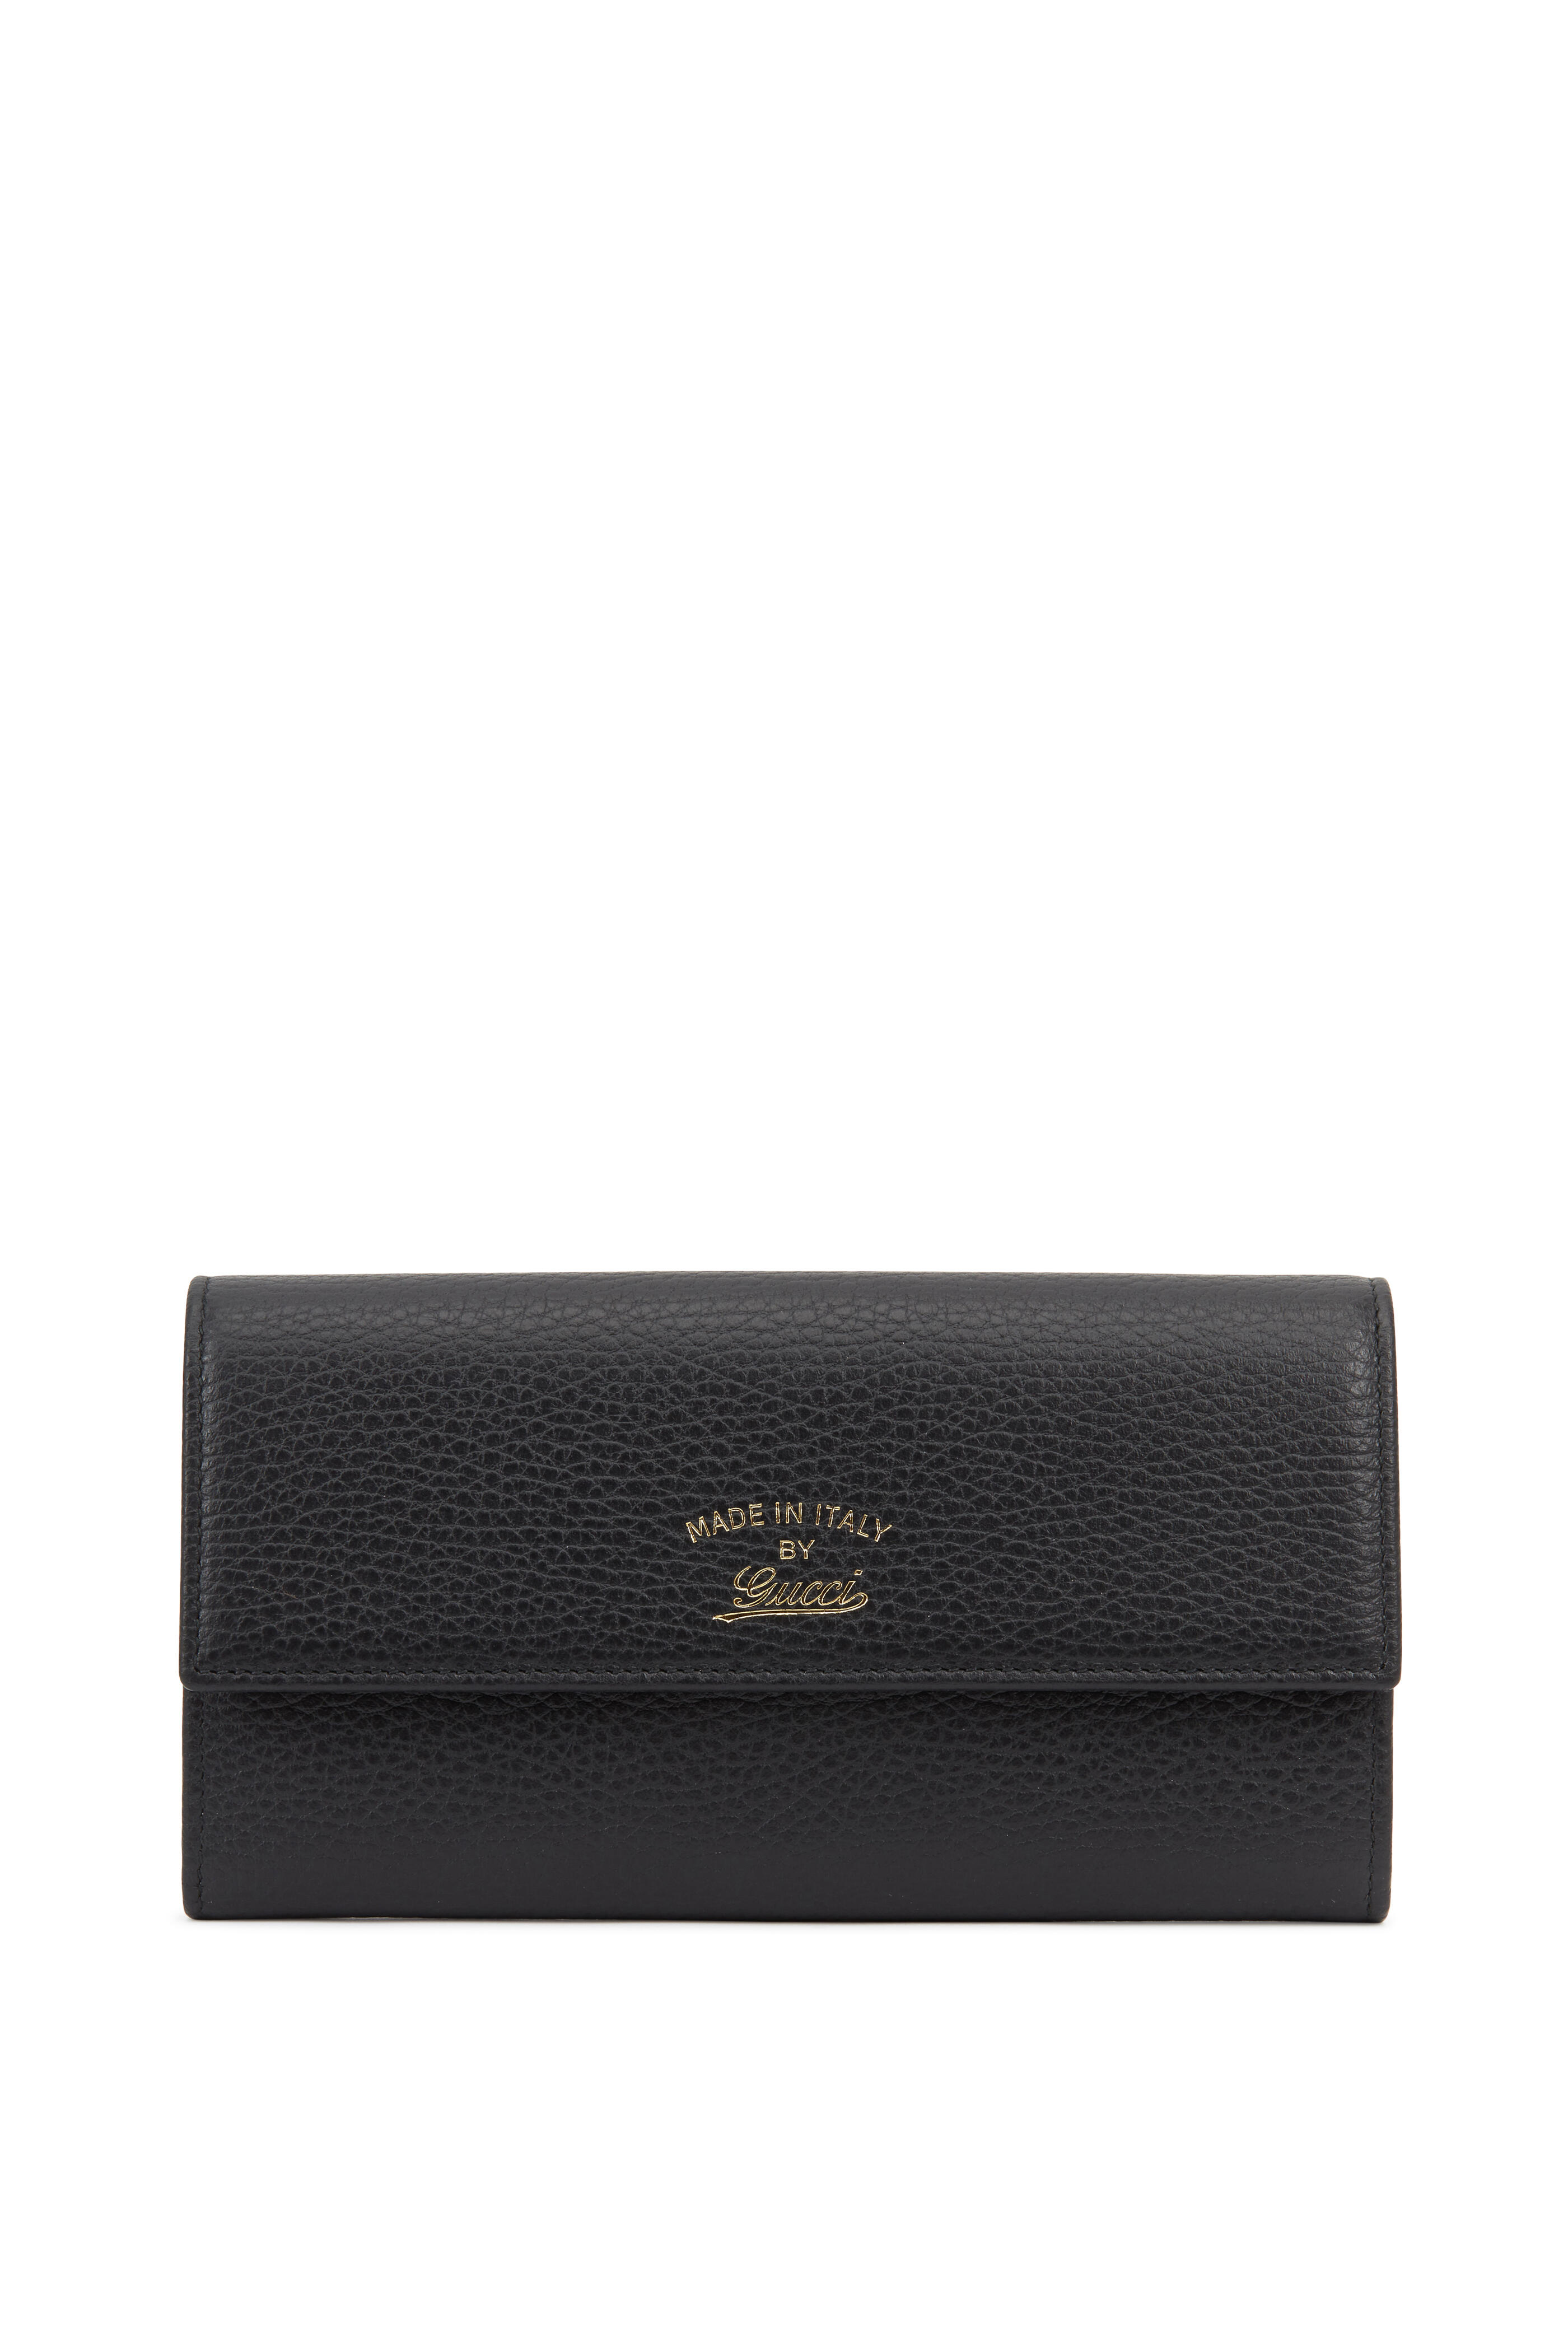 Gucci Long Swing Leather Wallet